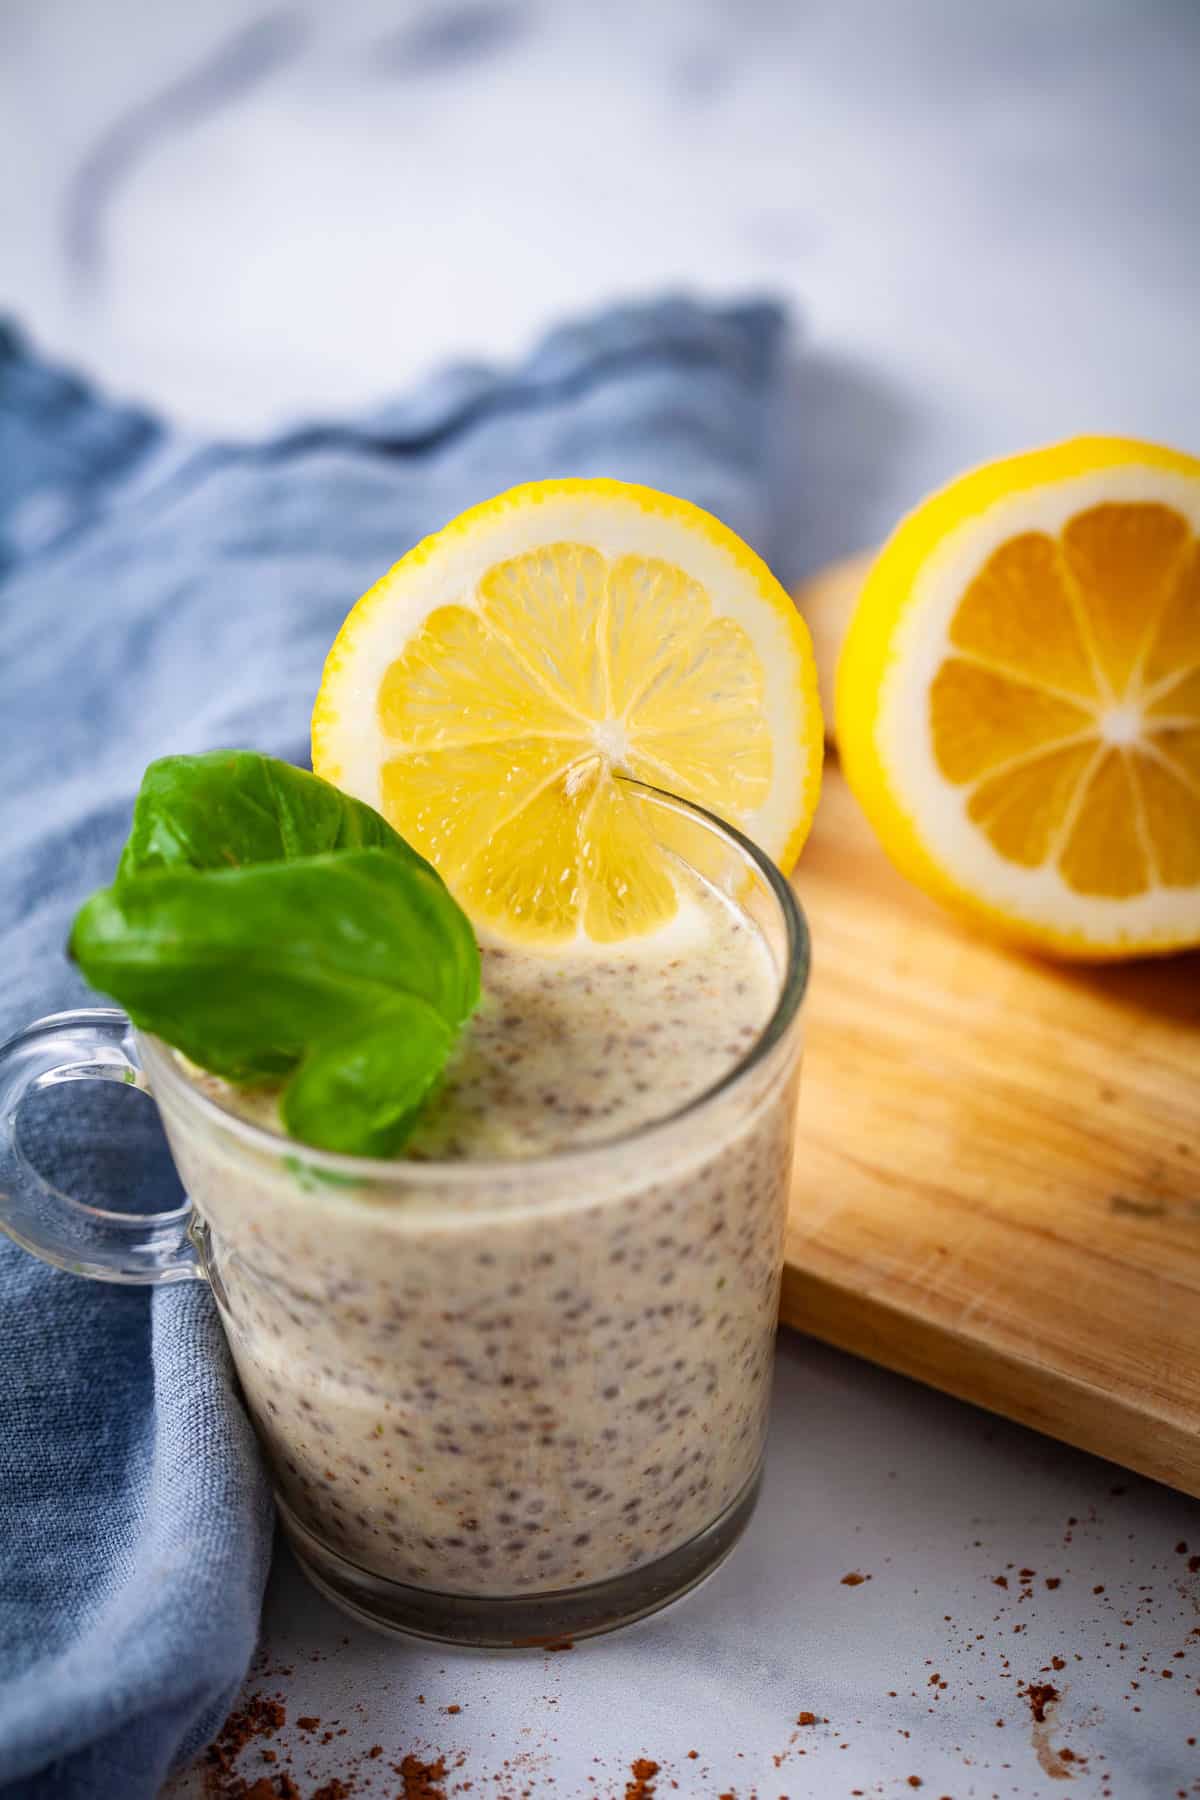 A small glass cup filled with chia pudding and topped with fresh Basil leaves and a slice of lemon.